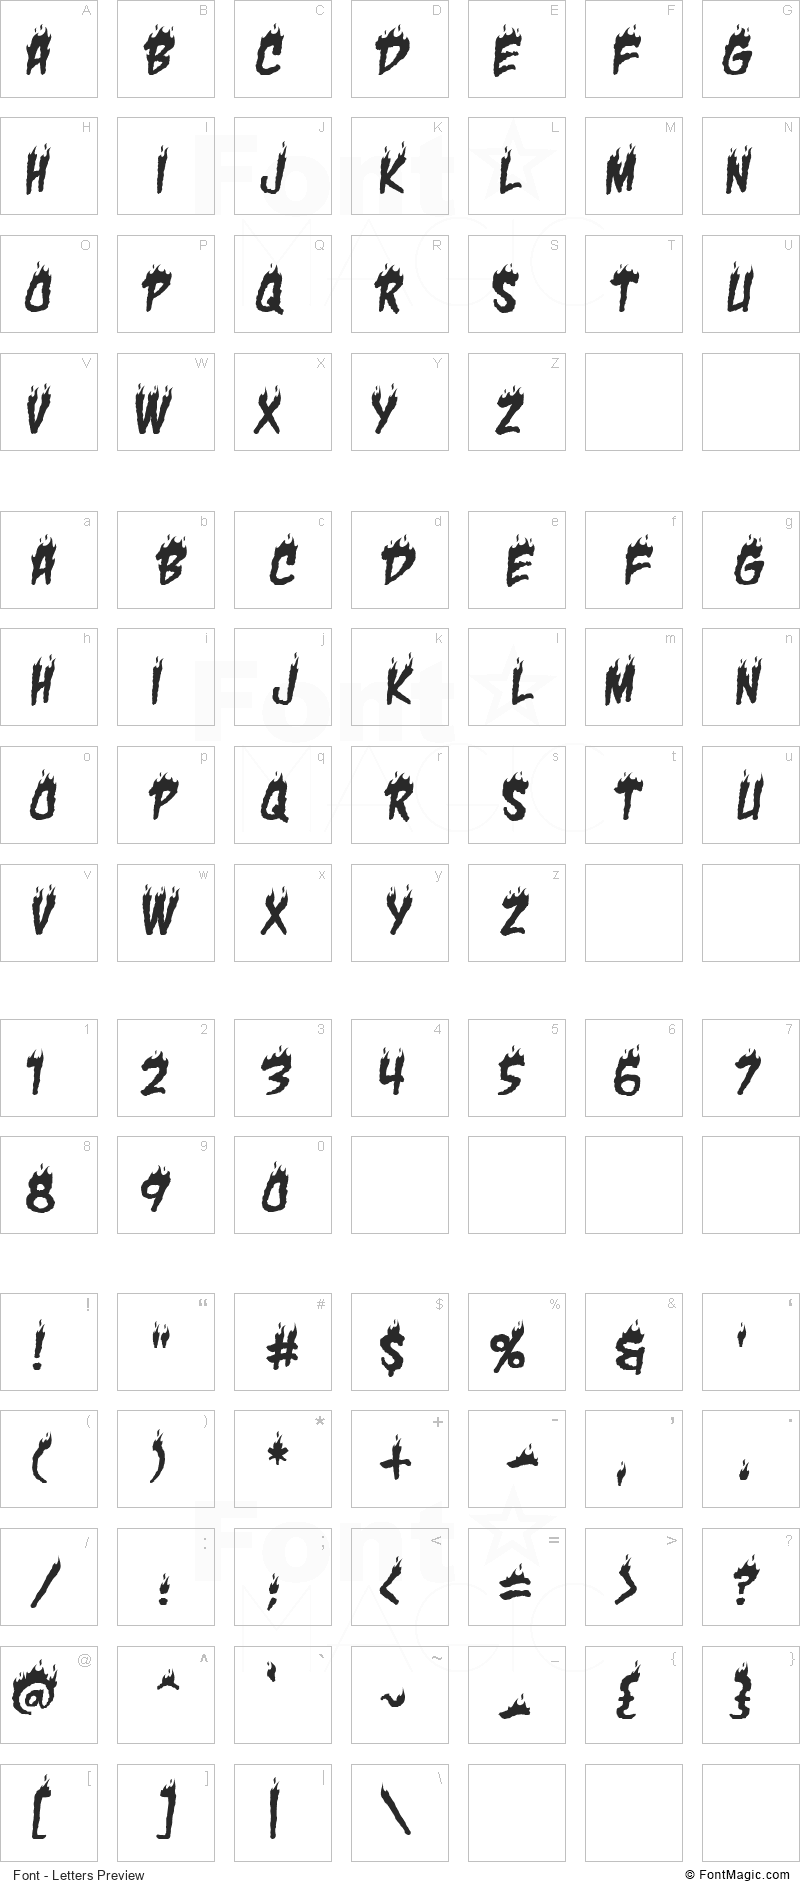 Char BB Font - All Latters Preview Chart